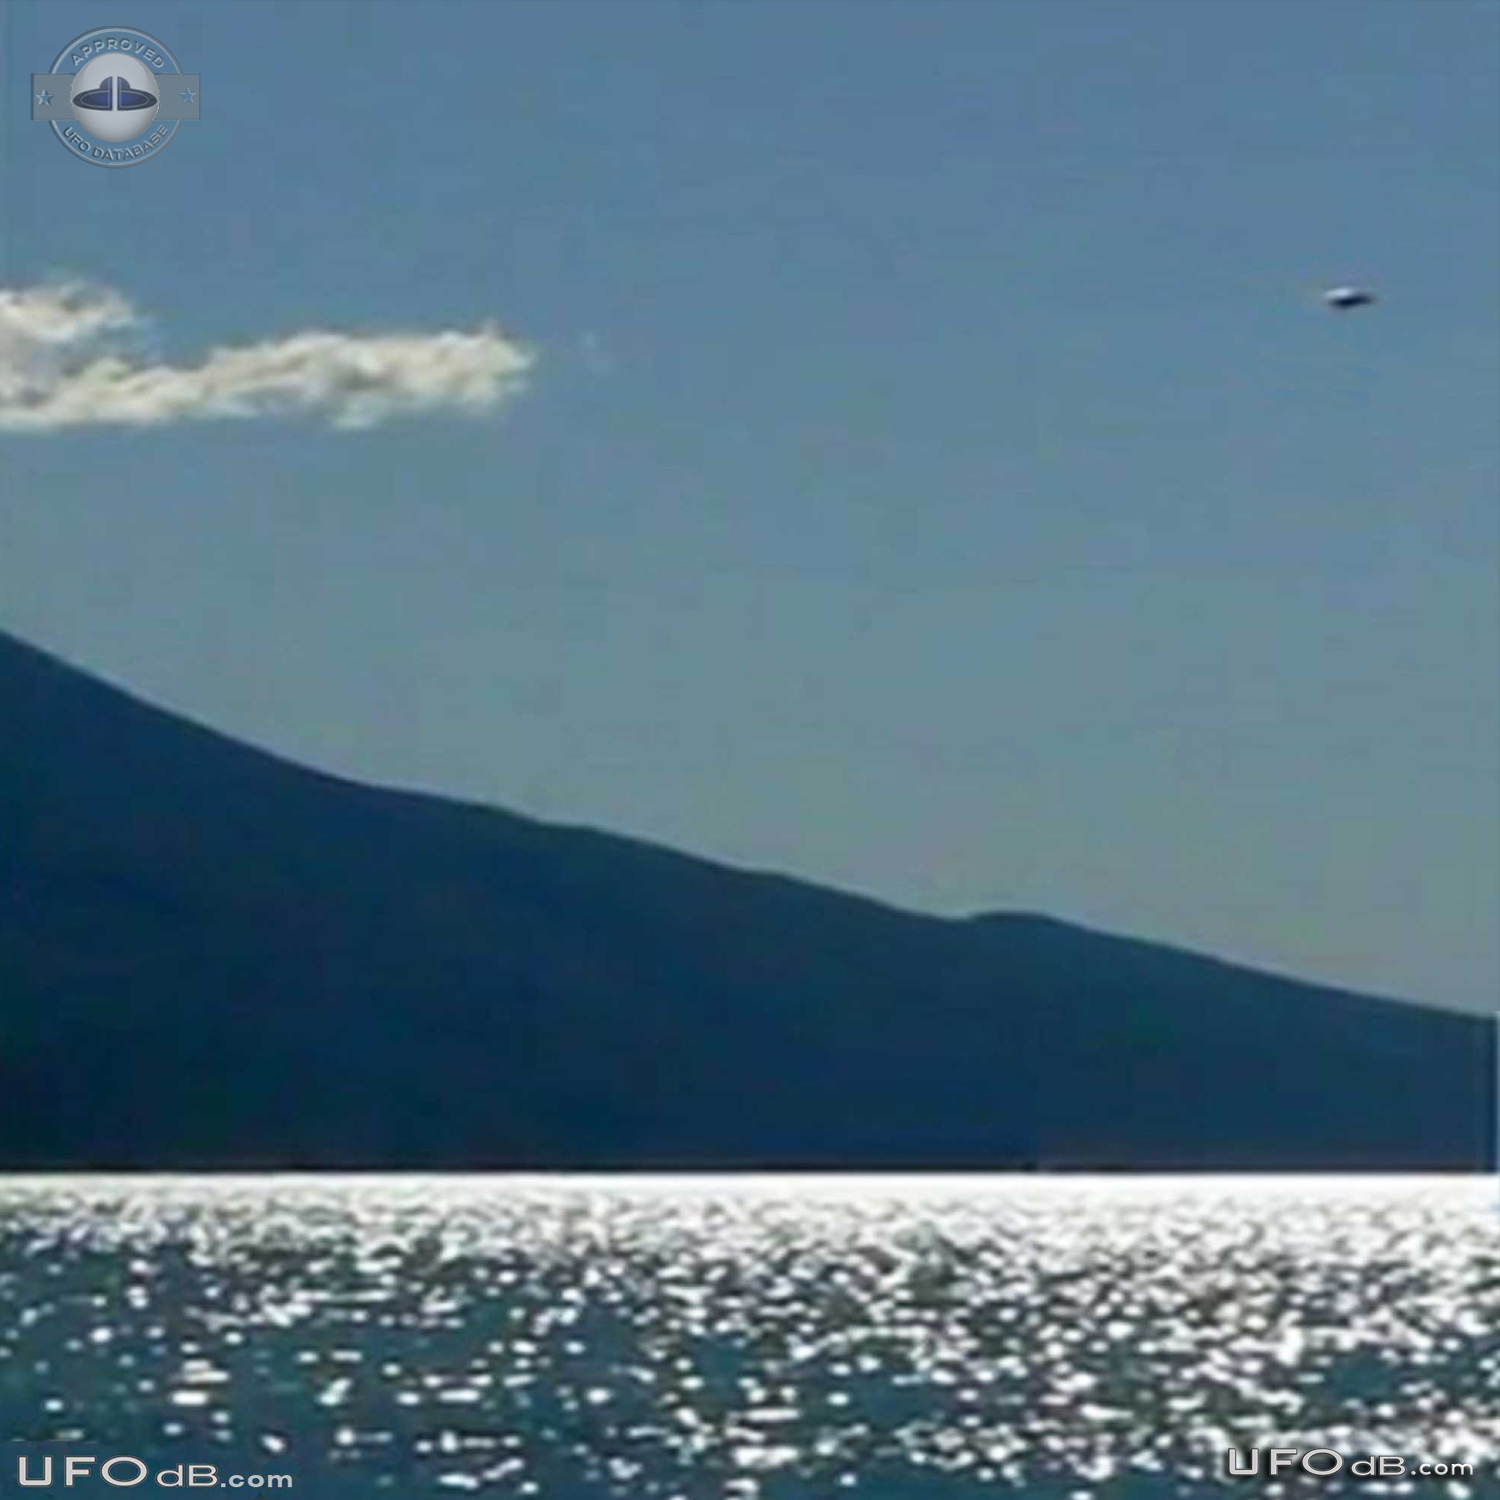 Toutist in Riva del Garda, Italy get a picture of a UFO - October 2011 UFO Picture #382-4